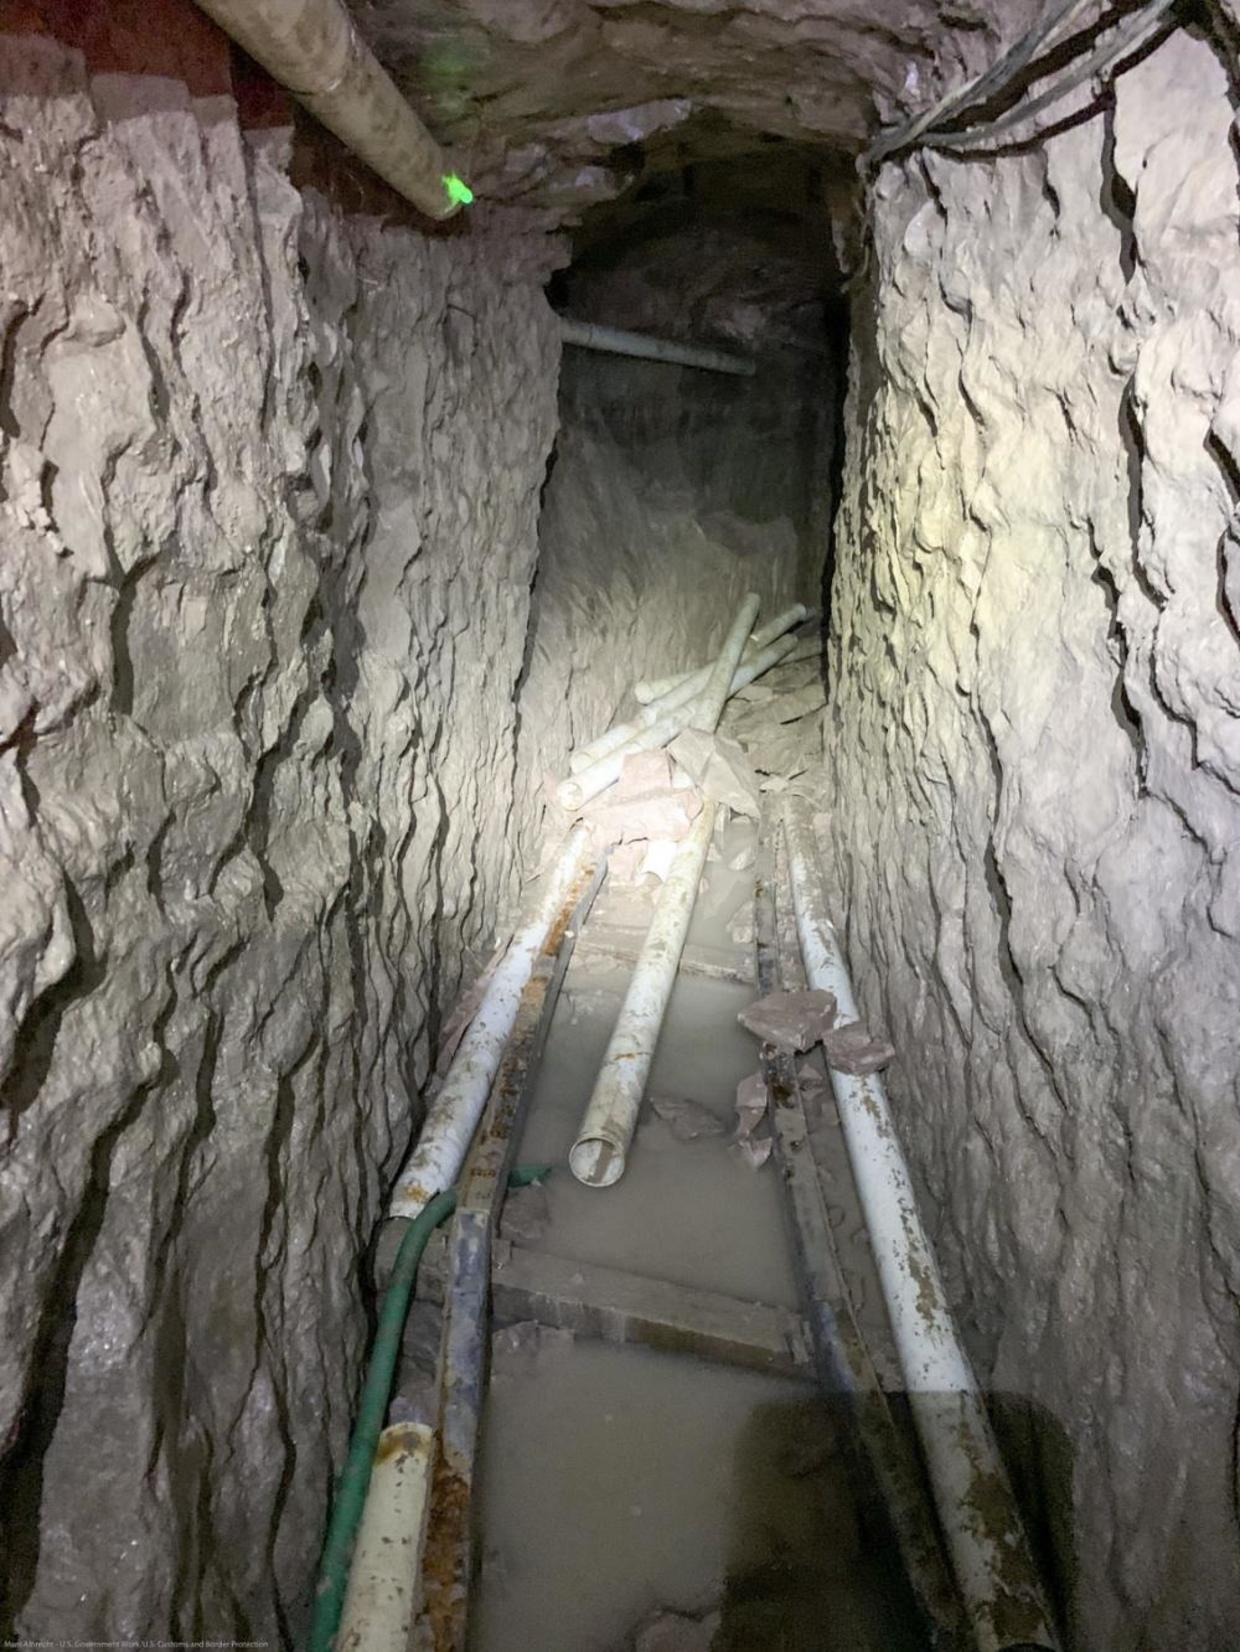 record-long-drug-tunnel-discovered-at-u-s-mexico-border-cbs-news